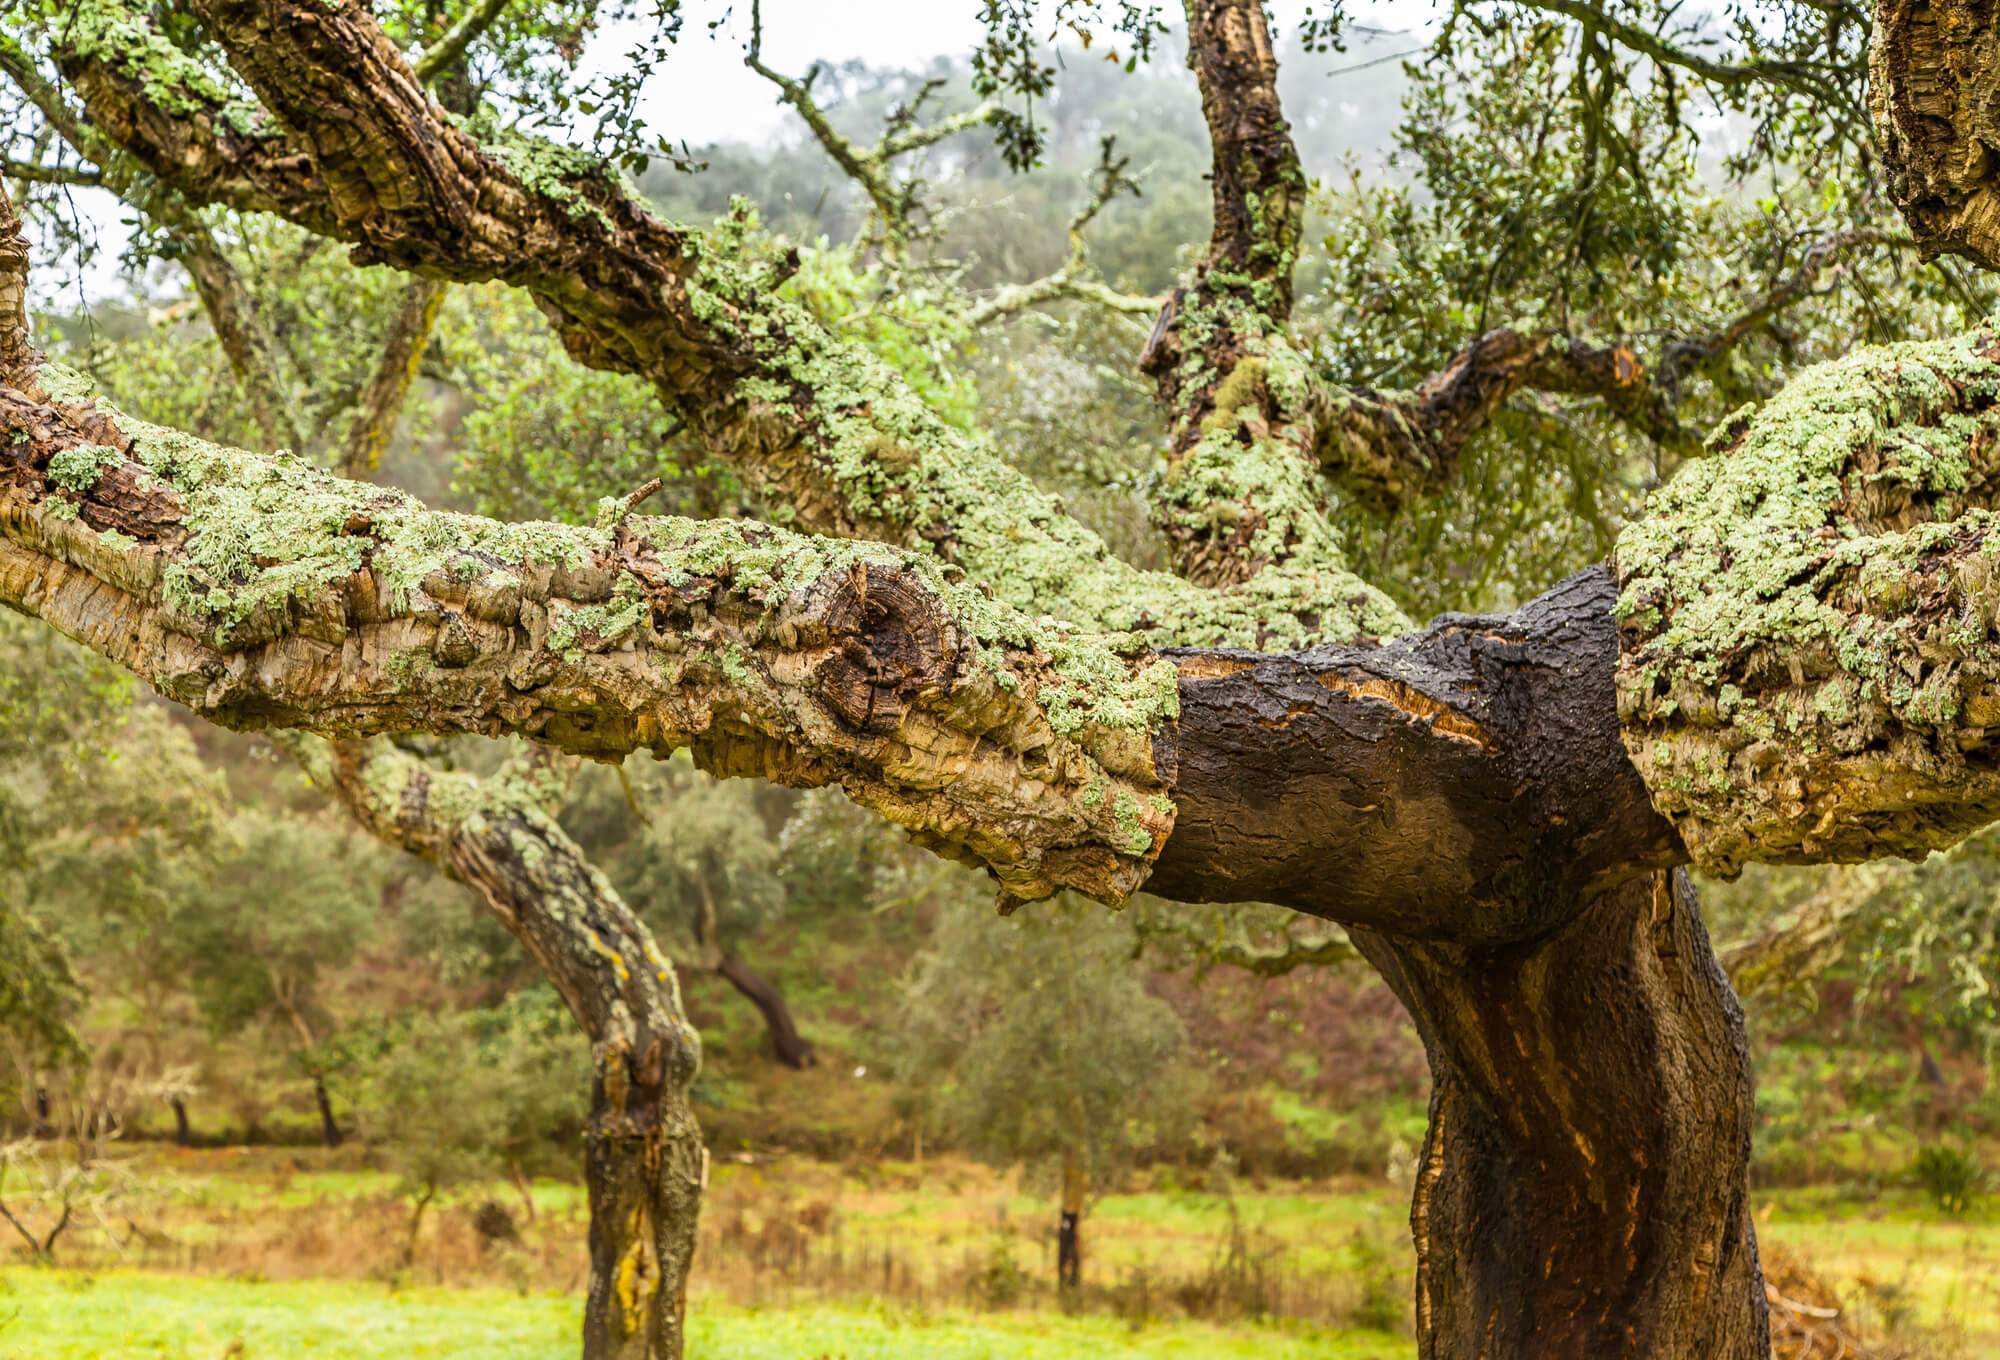 Cork comes from the Cork Oak Tree.